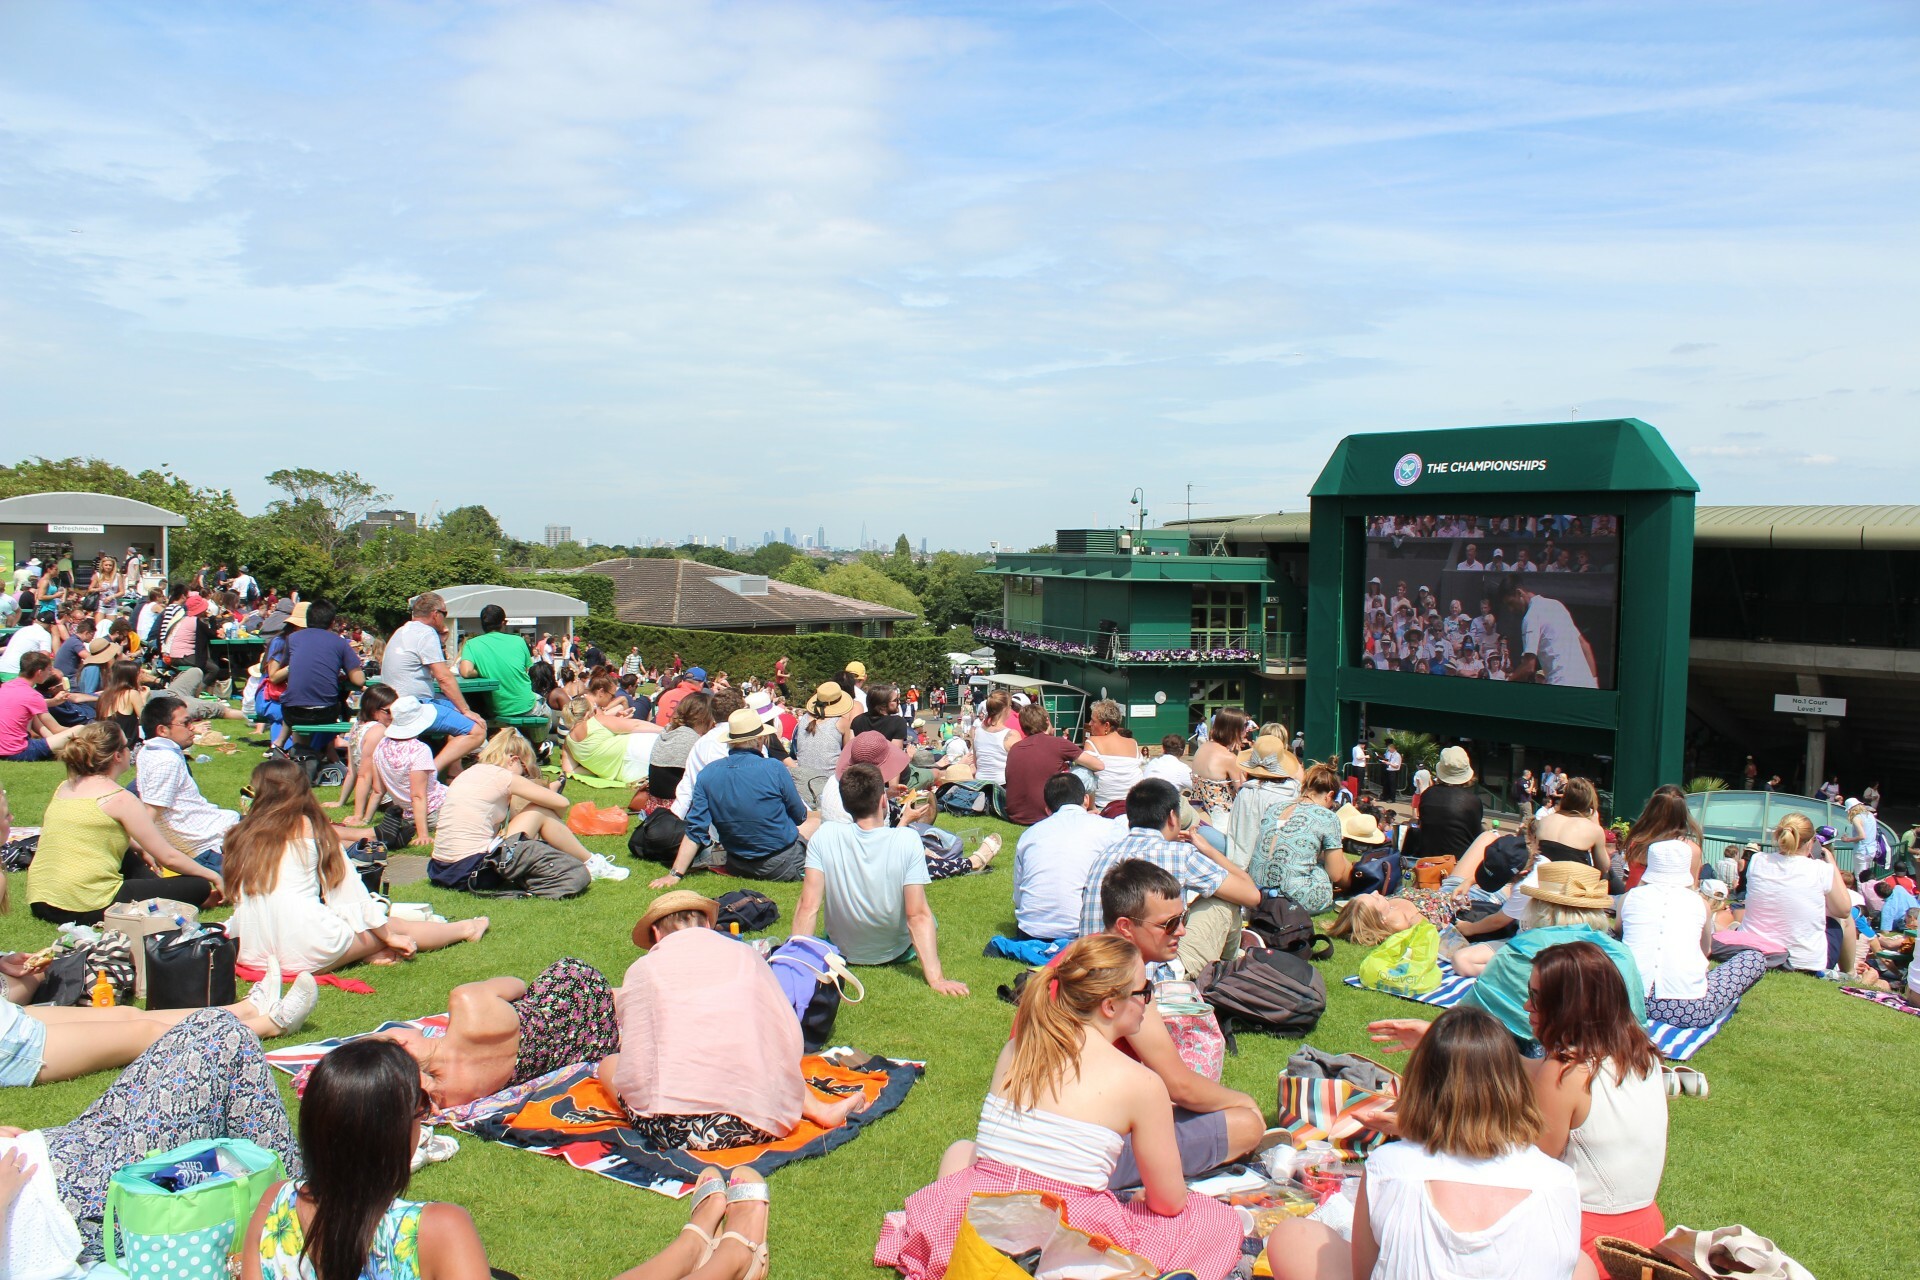 How to watch Wimbledon, including this year's TV schedule